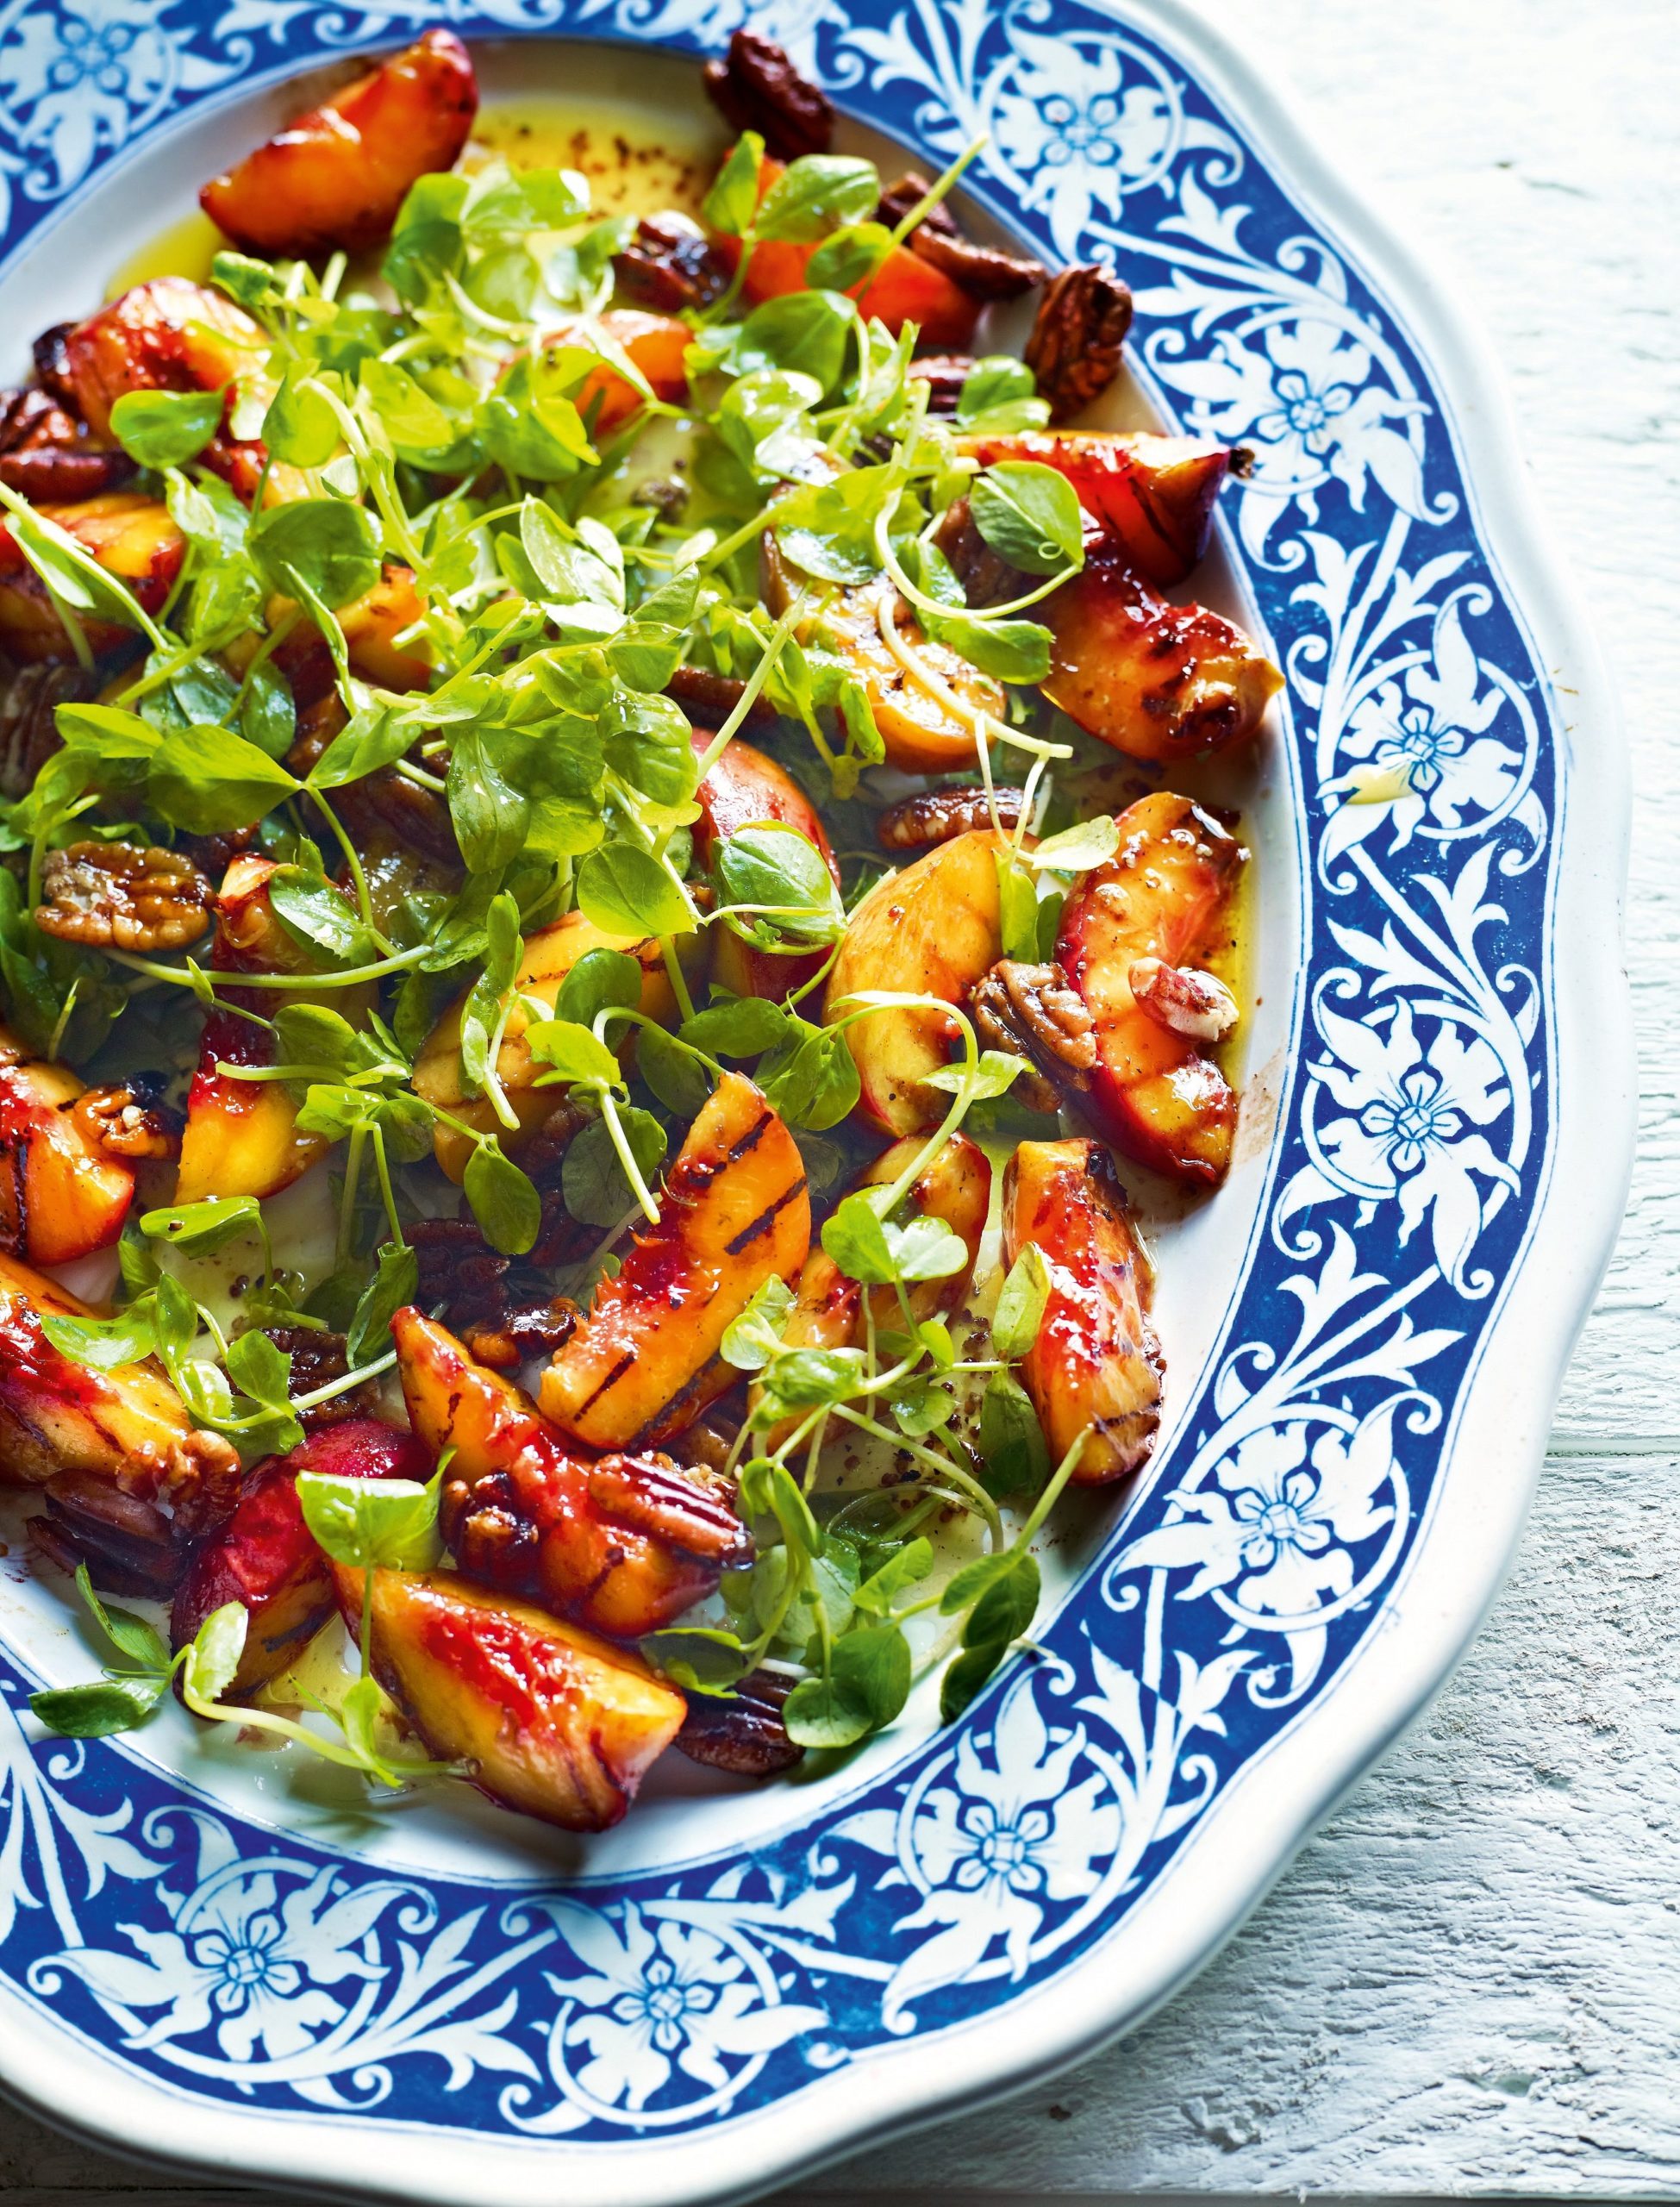 Salad of Chilli and Honey Peaches